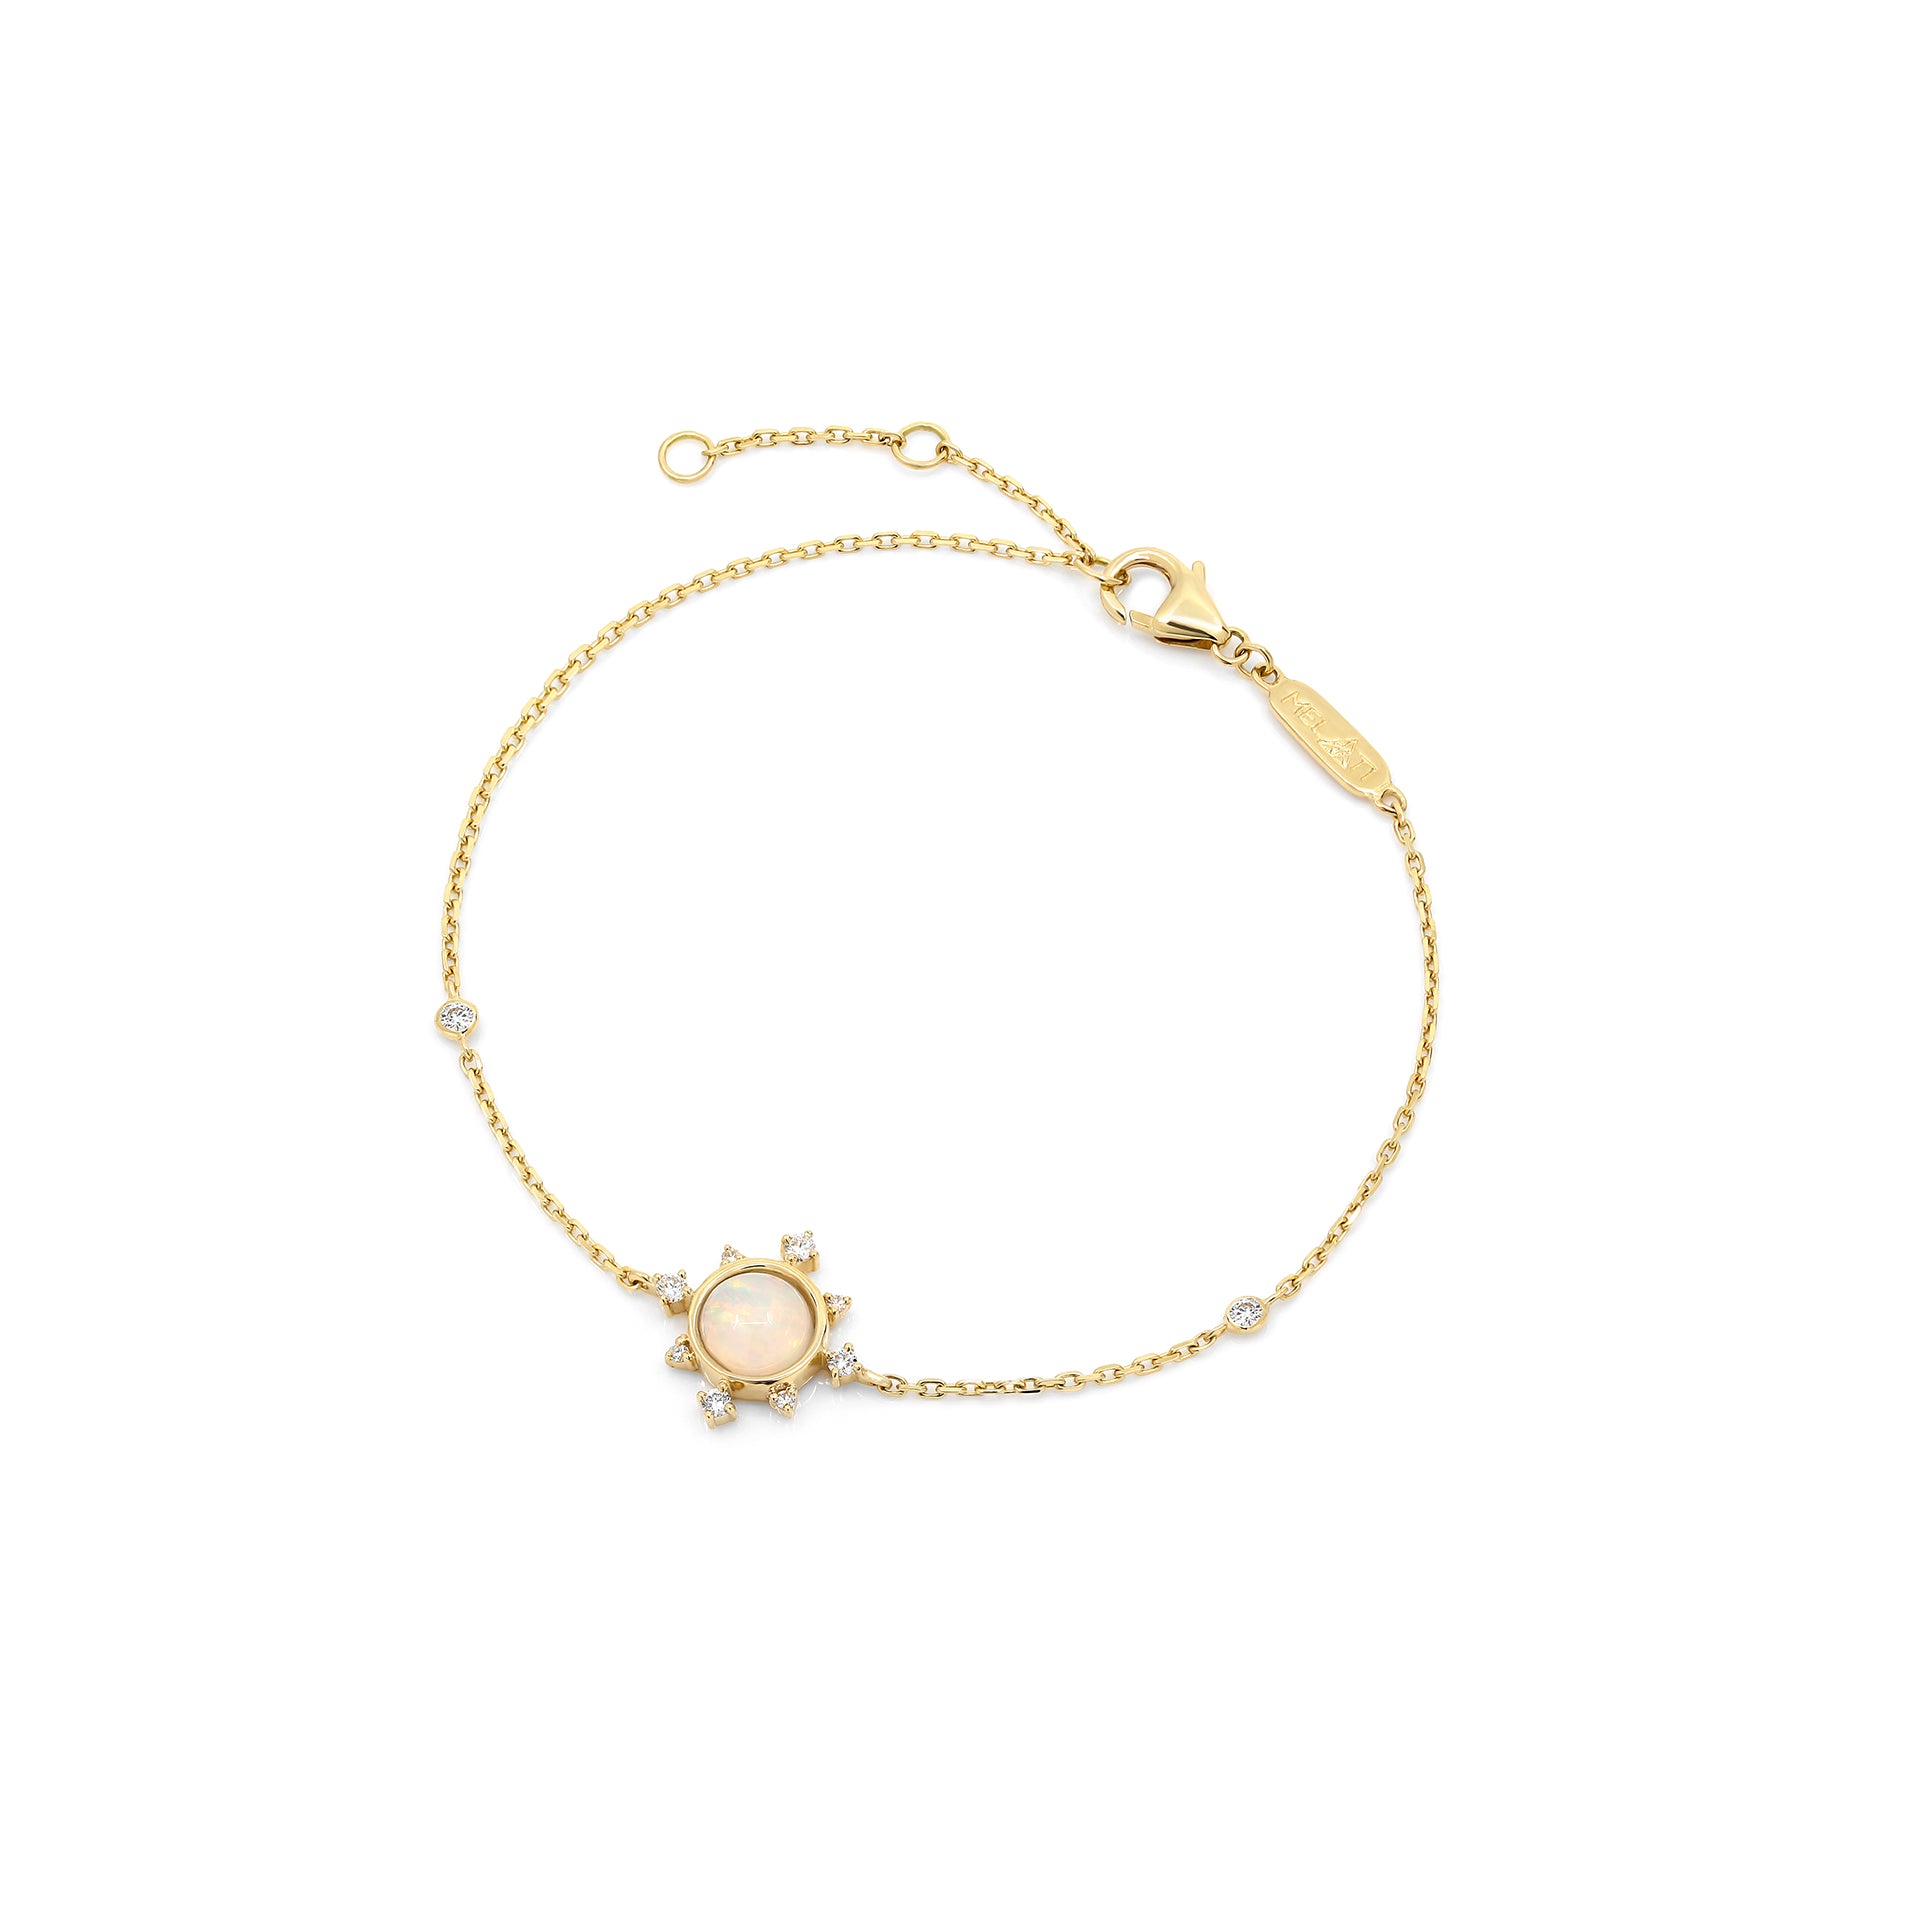 Melati Rise bracelet in Yellow Gold with Opal and diamonds